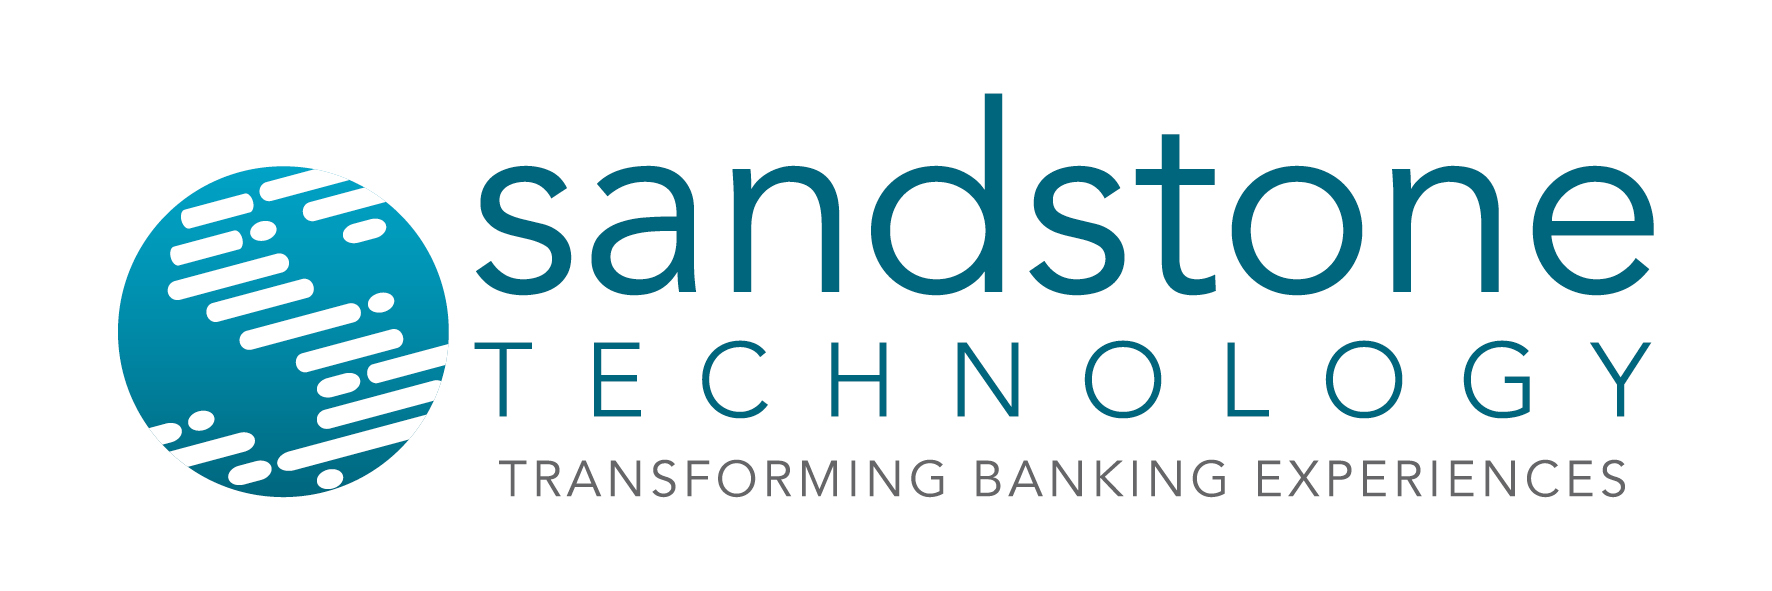 Sandstone Technology Announce Partnership with FinTech North